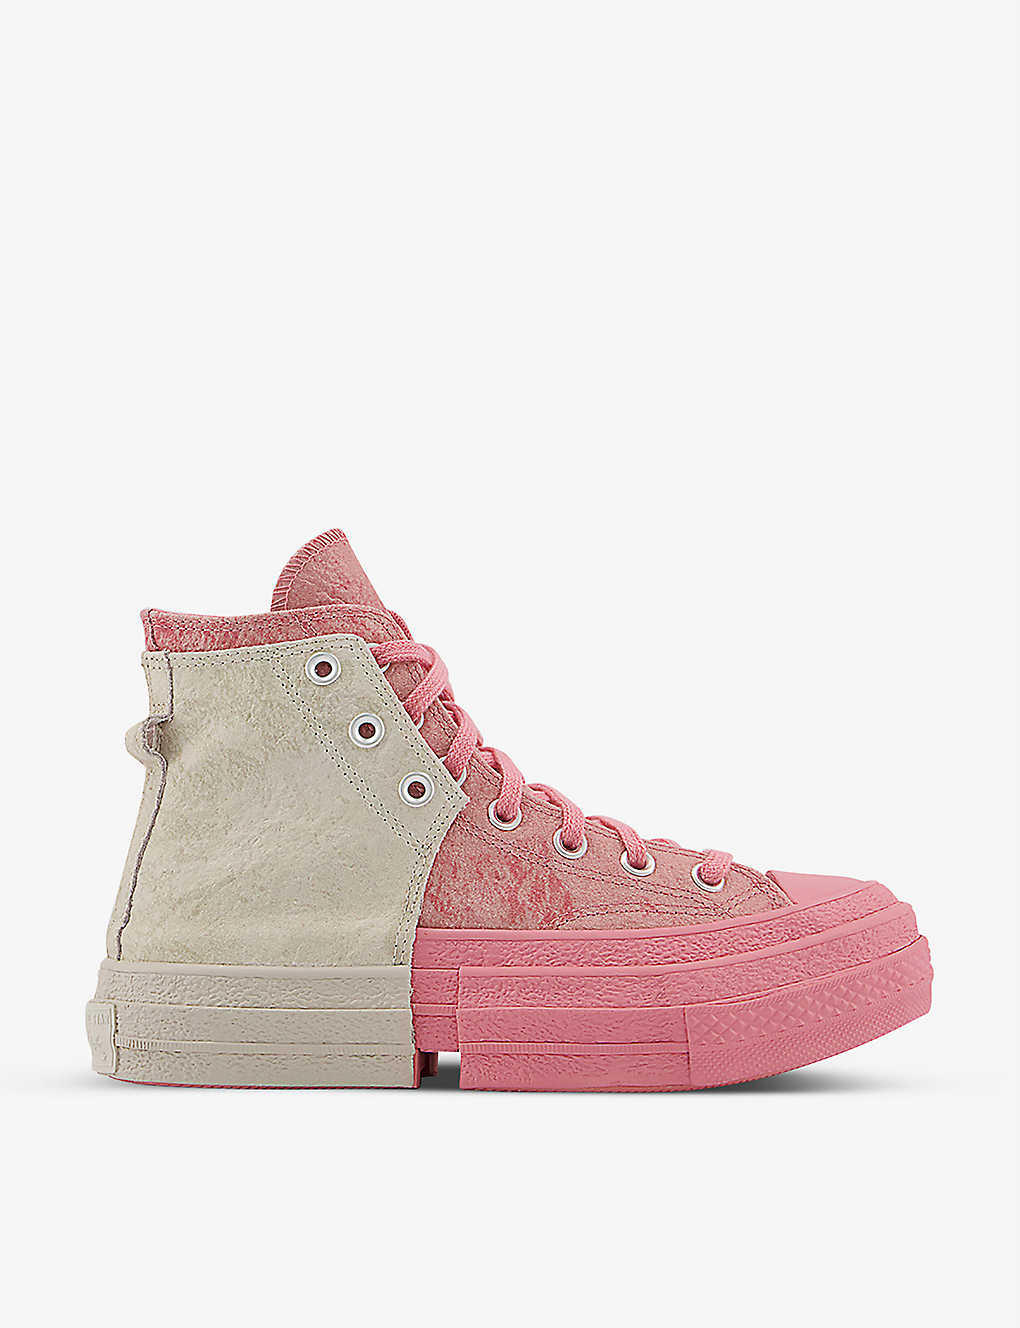 Feng Chen Wang 2-in-1 Chuck 70 high-top leather trainers(9446234)